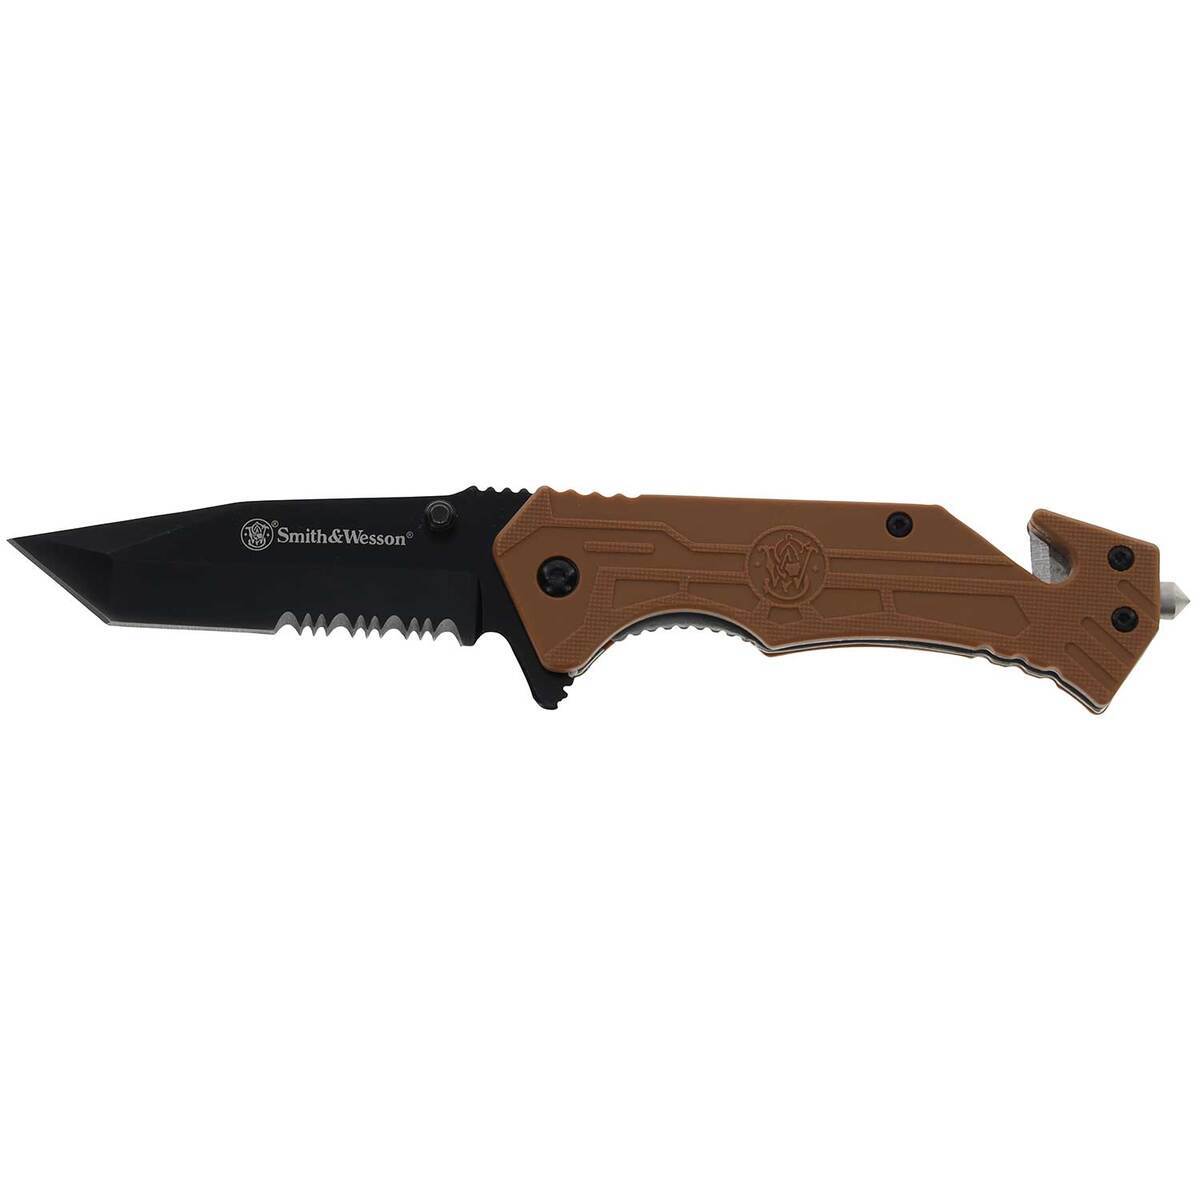 Stone River Gear Ceramic Folding Knife With G10 Handle